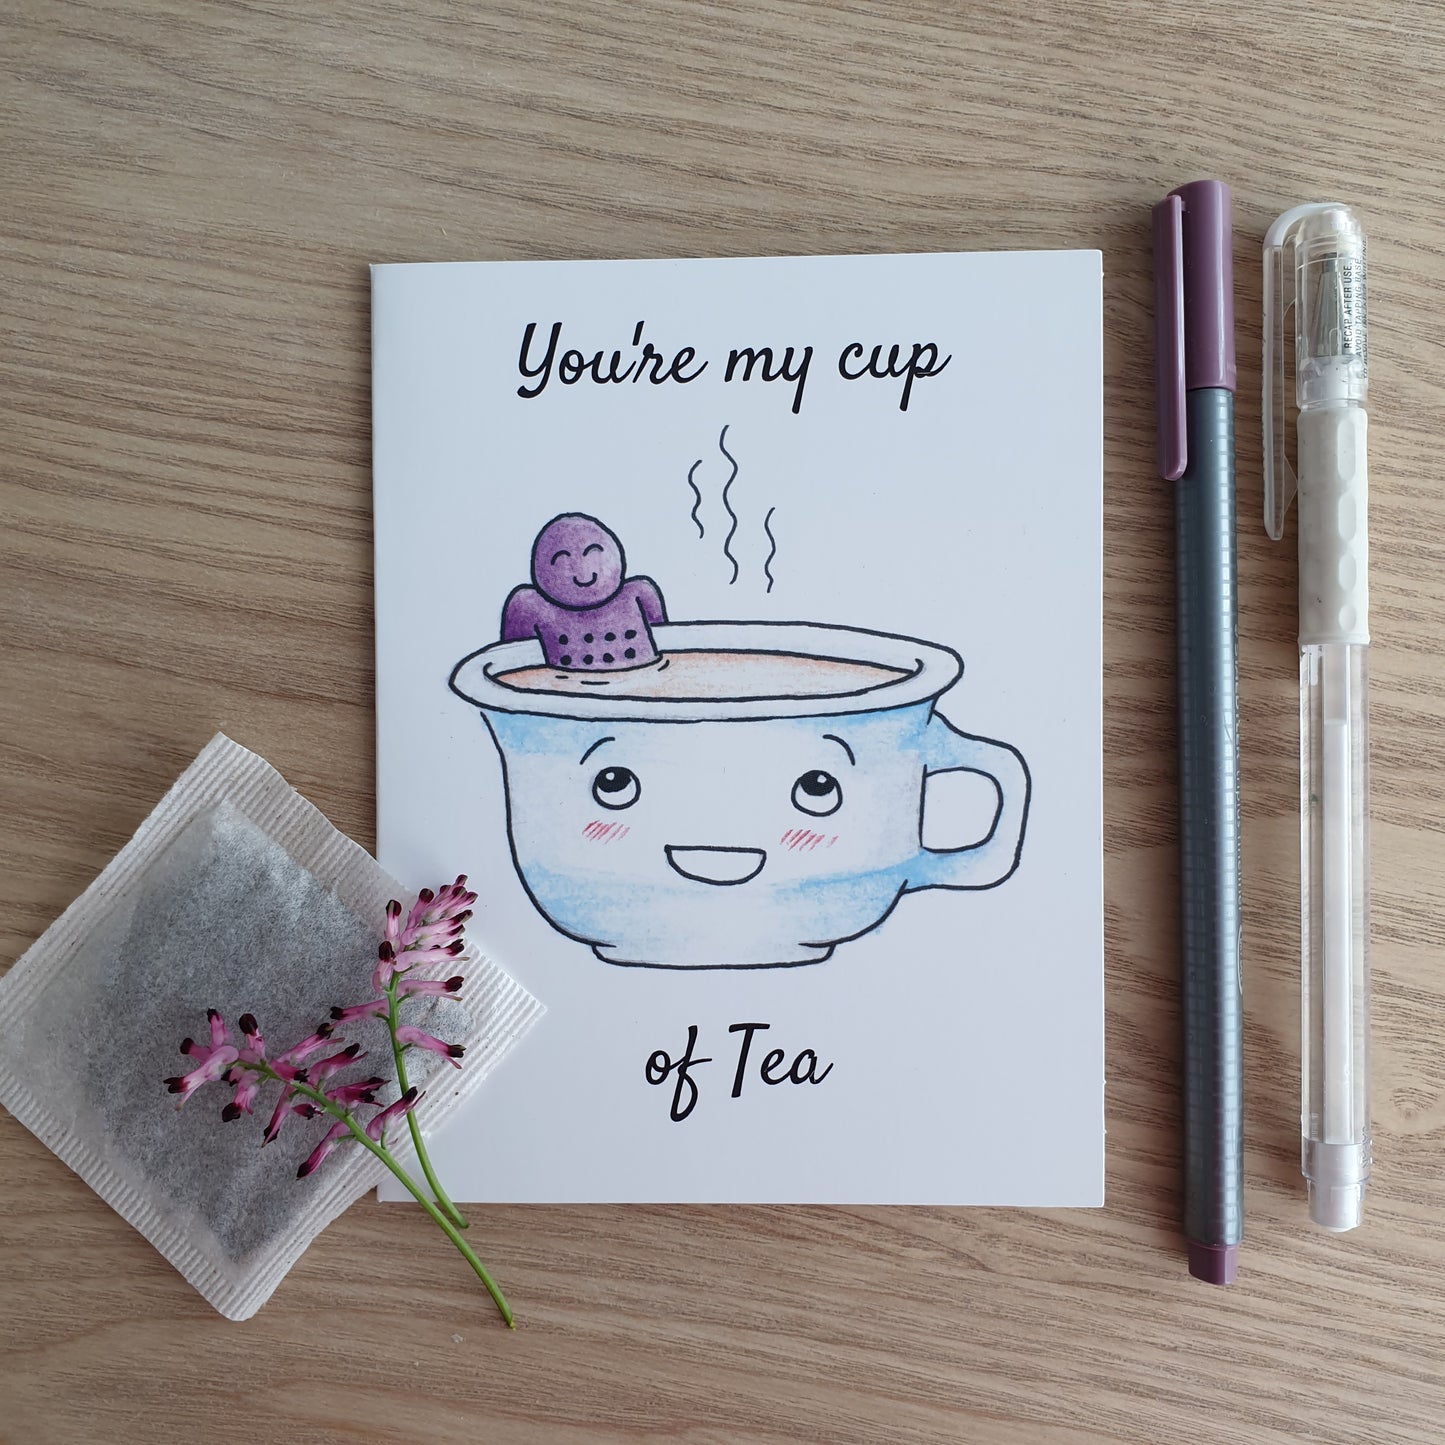 "You're My Cup Of Tea" greeting card